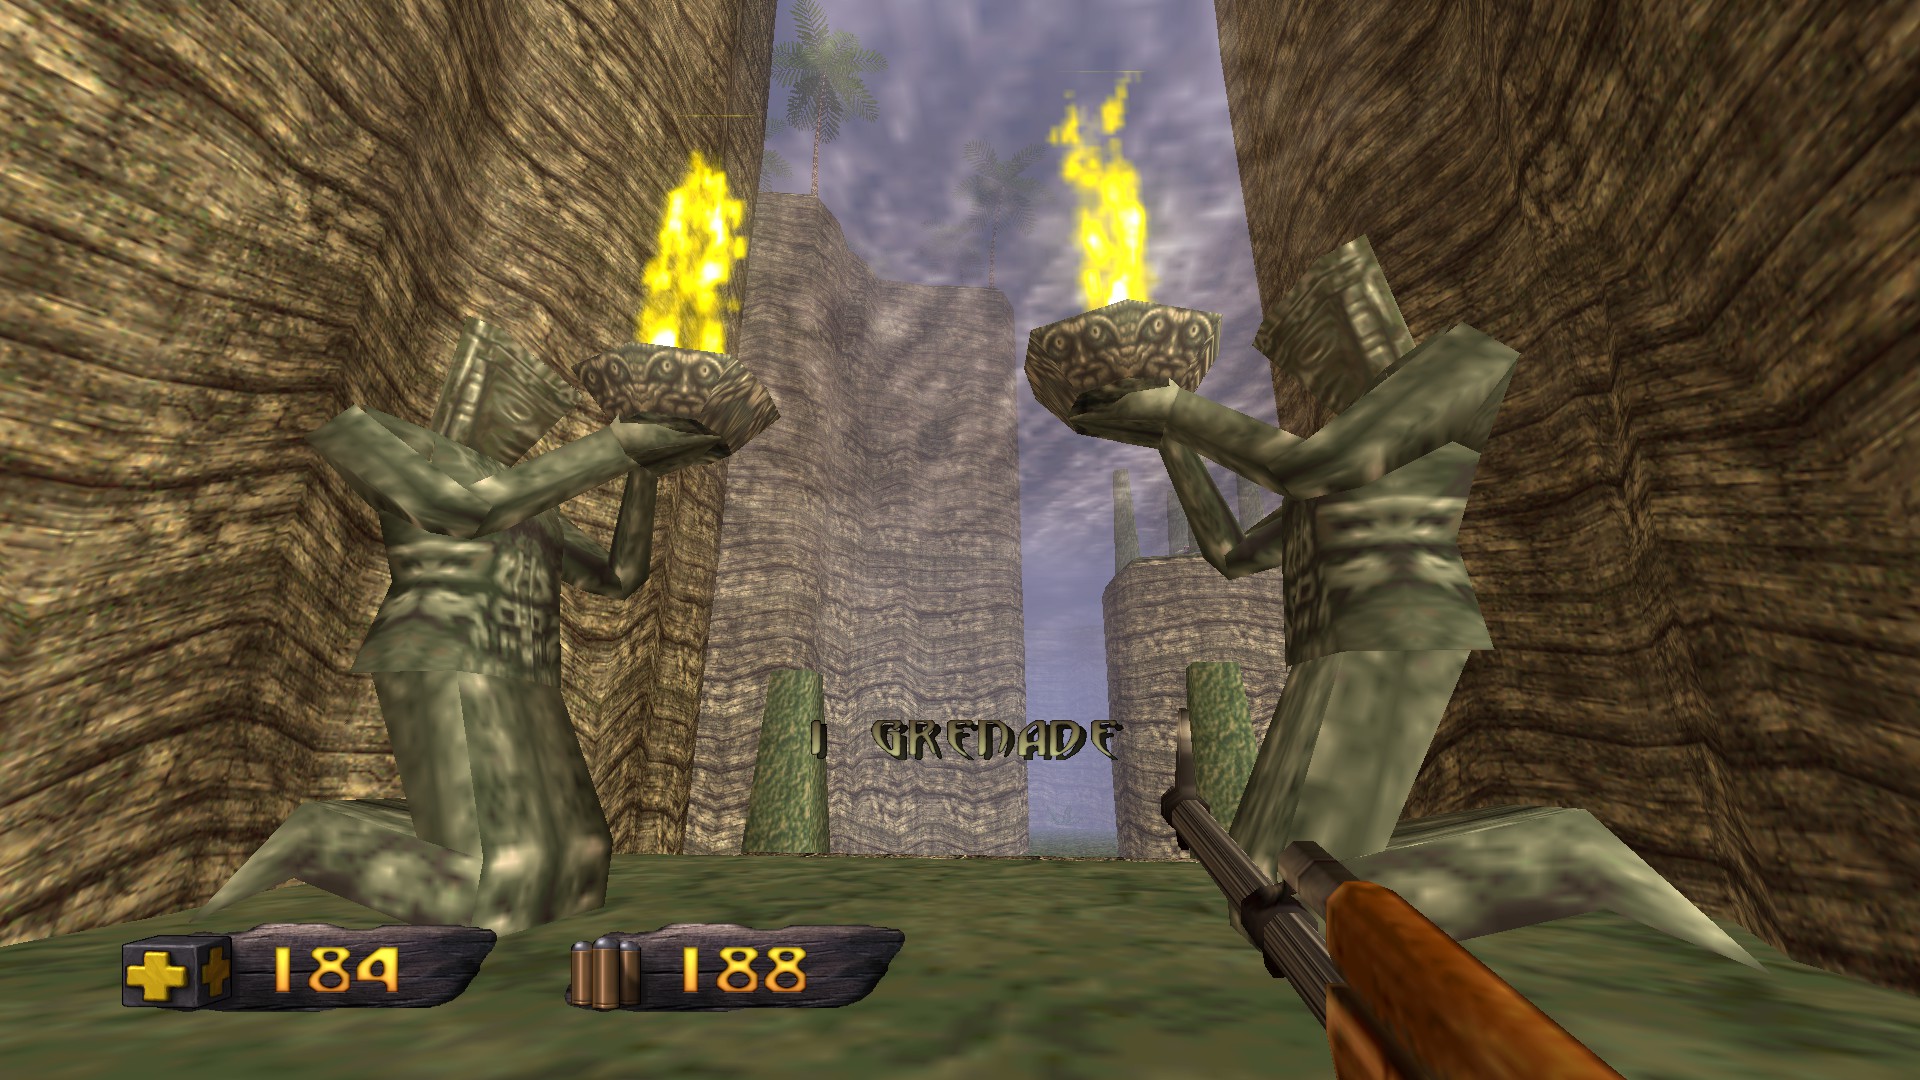 In-game screenshot of a level with two large fire holding statues on either side.